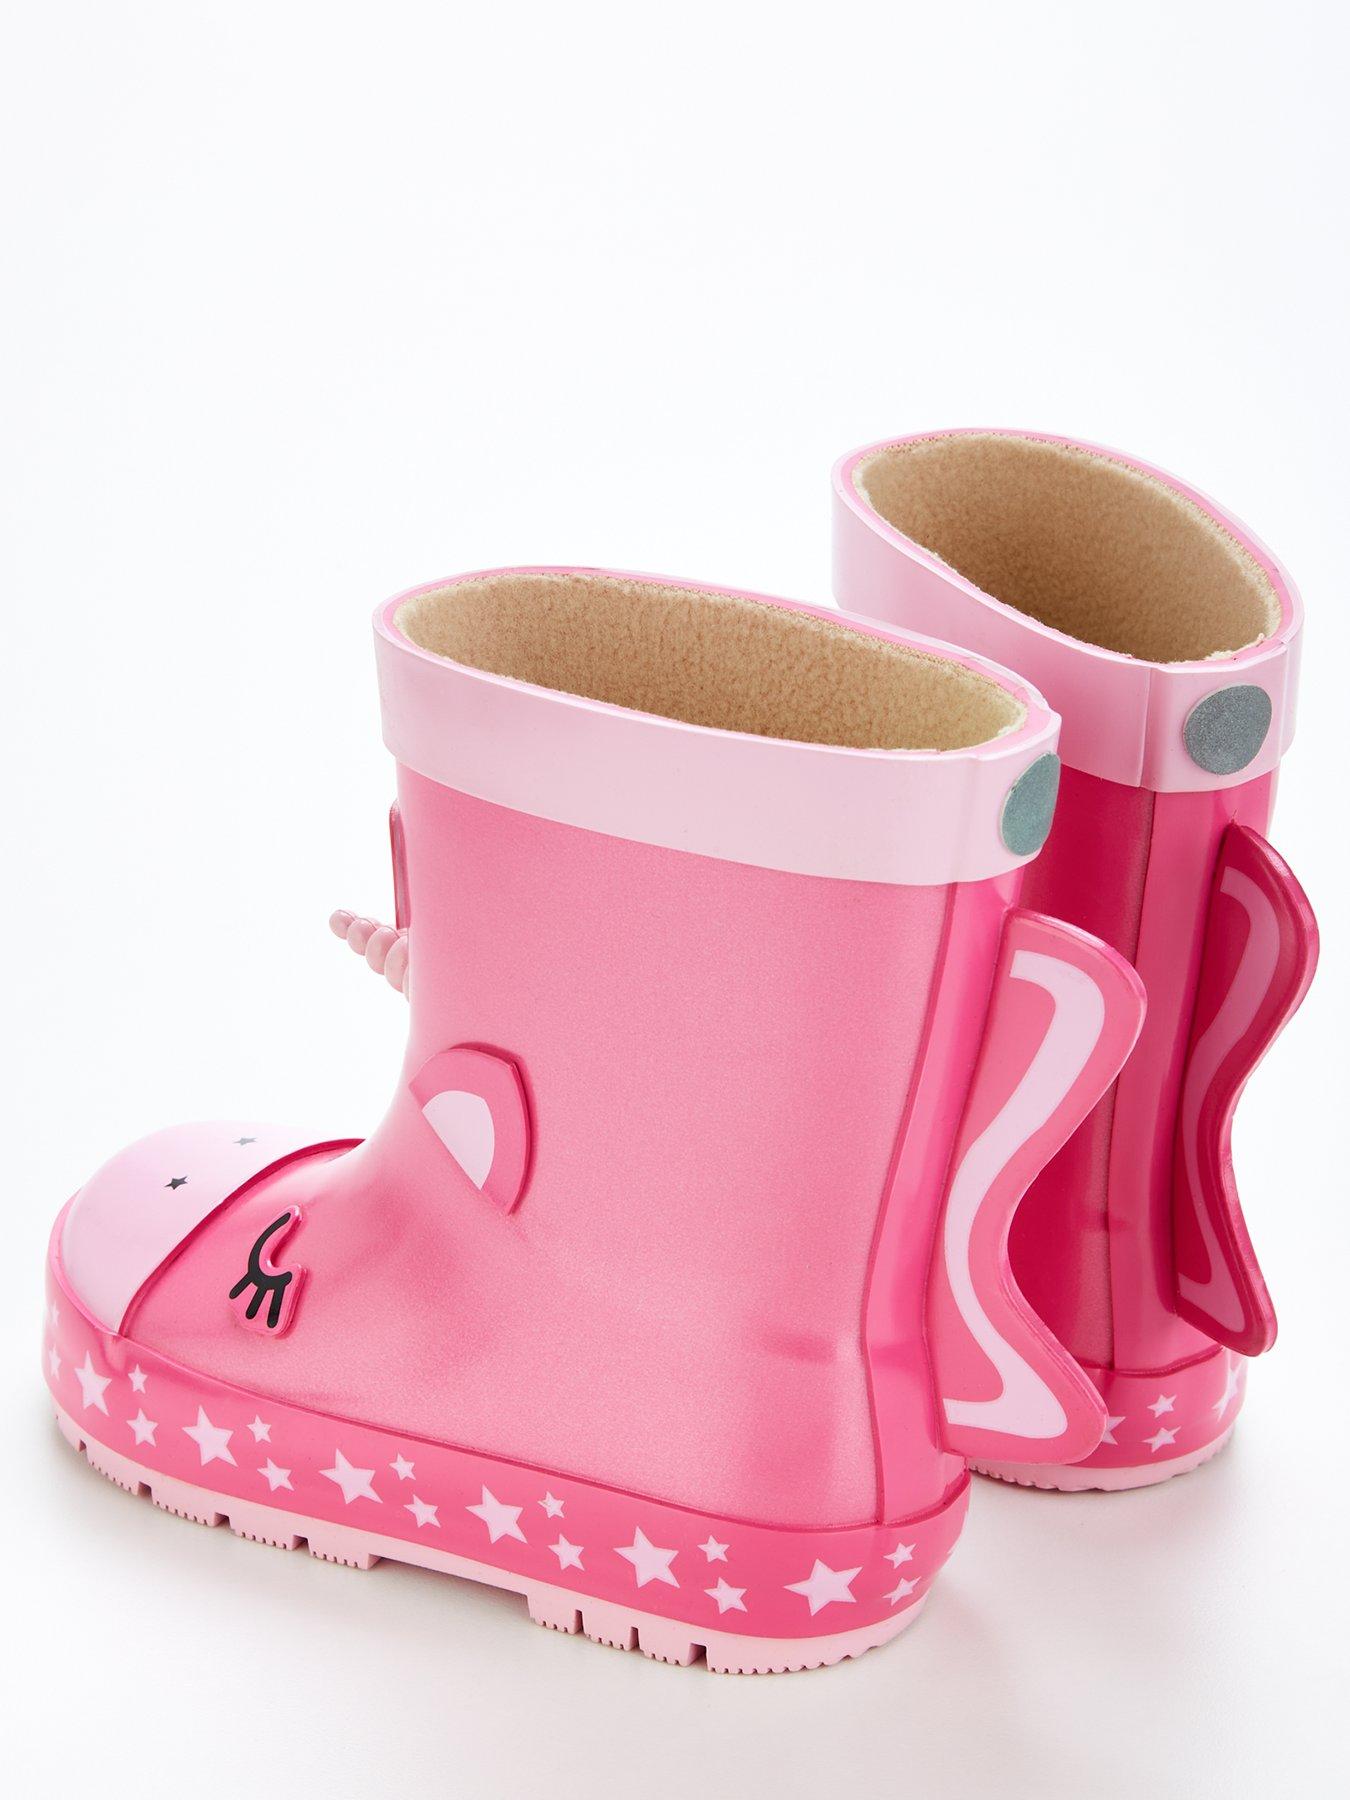 V by Very Girls ToeZone Unicorn Wellies - Pink